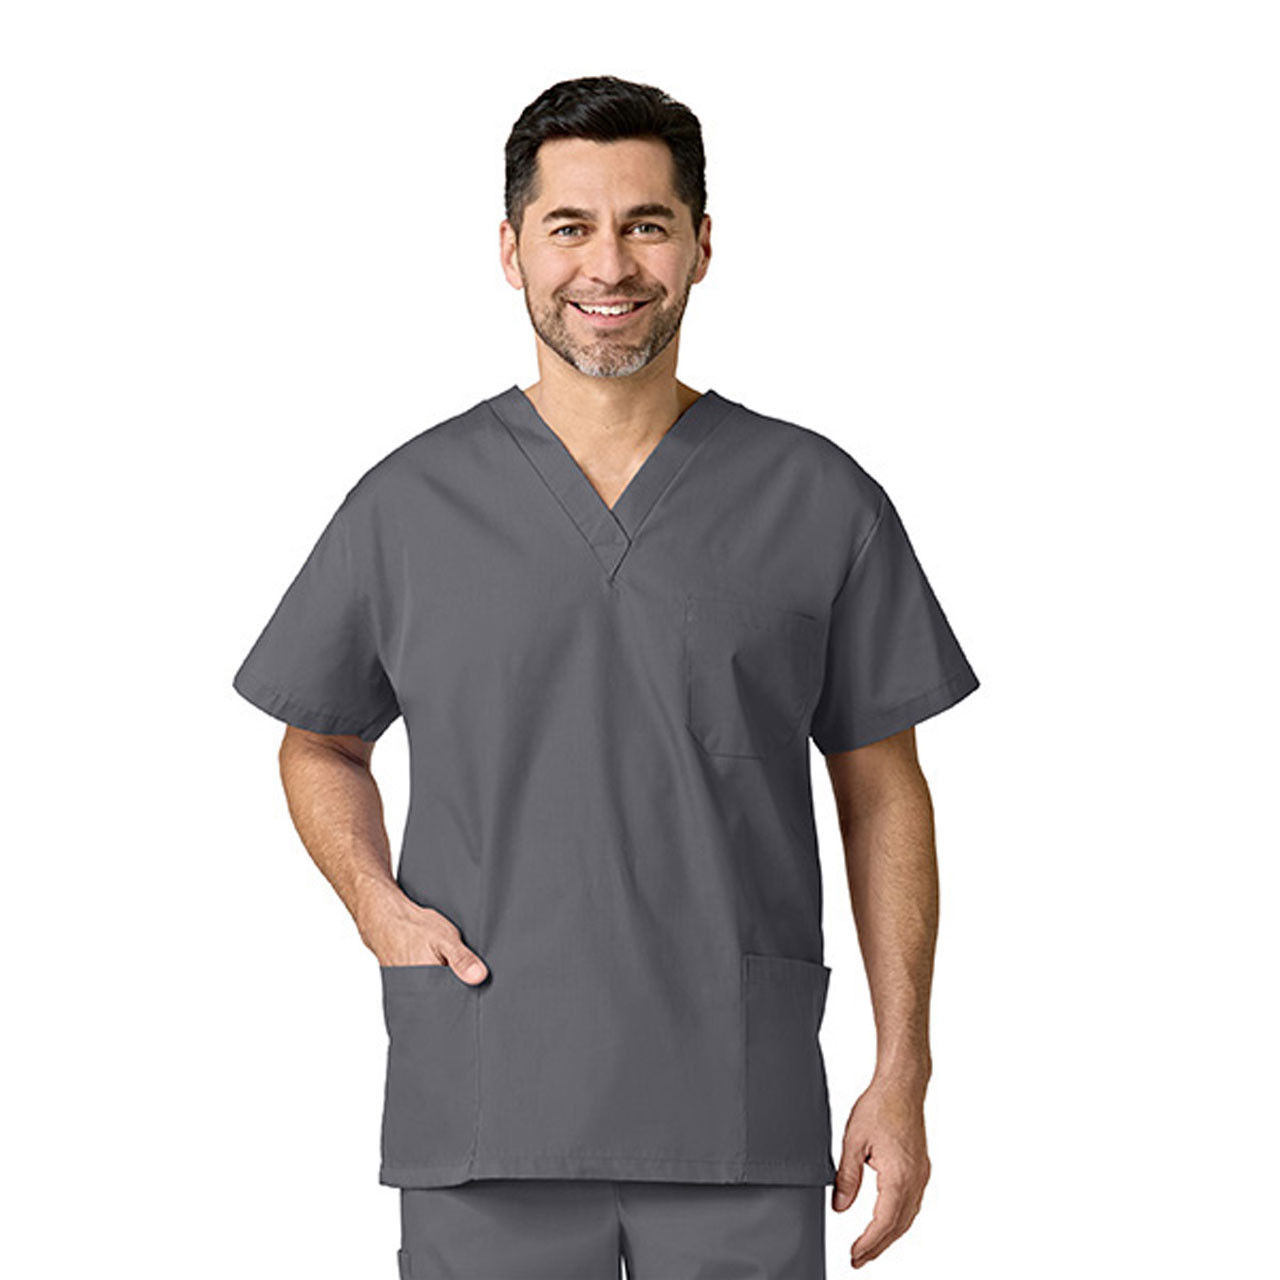 Does the Fashion Seal Scrub Top have a designated place to hold scissors?